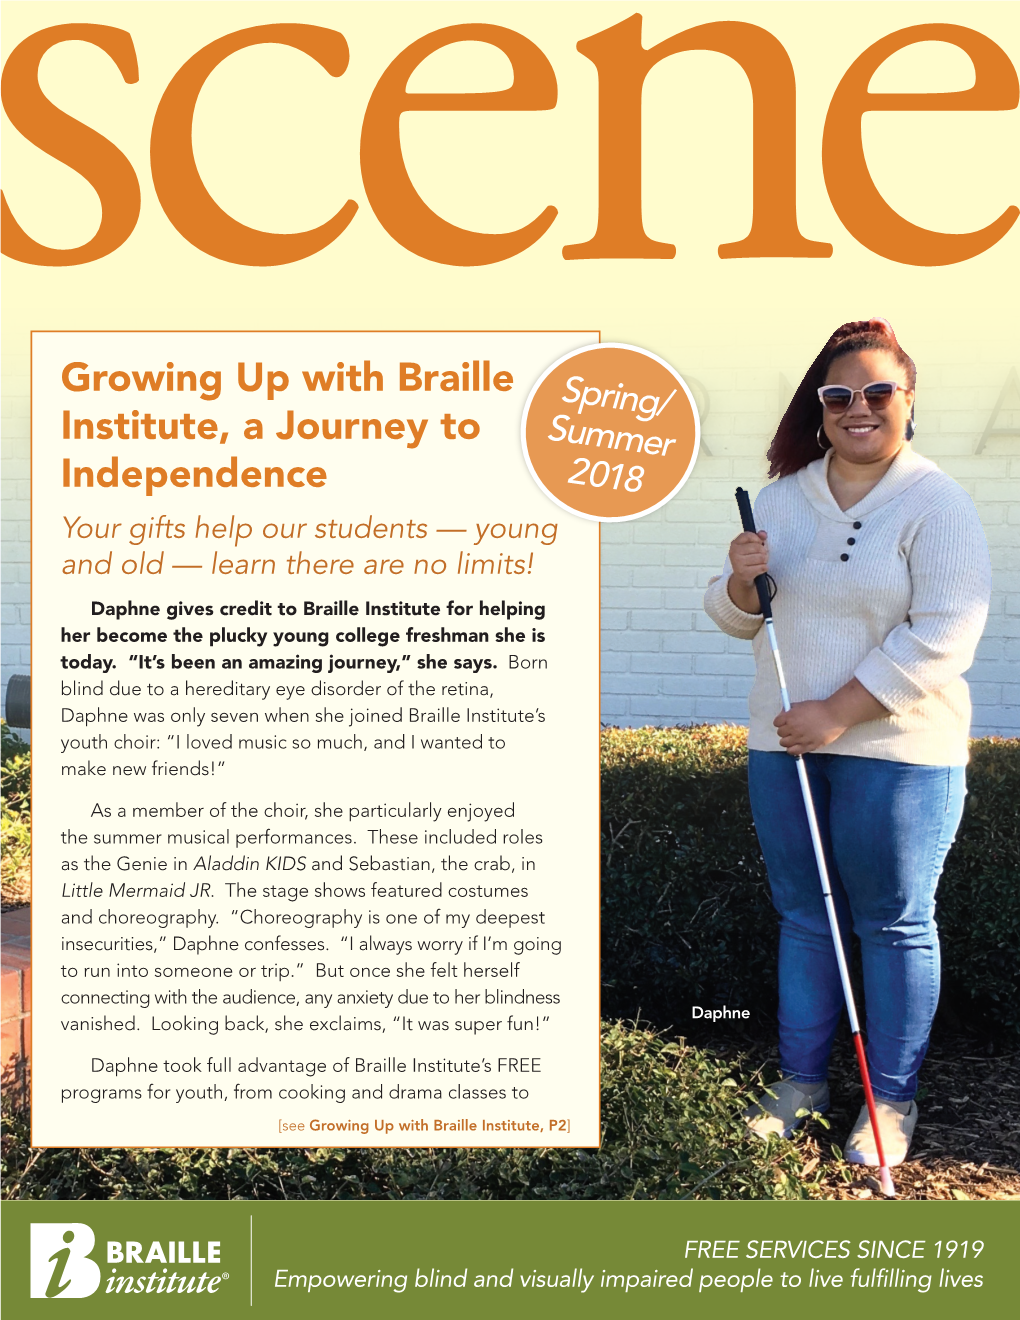 Growing up with Braille Institute, a Journey to Independence